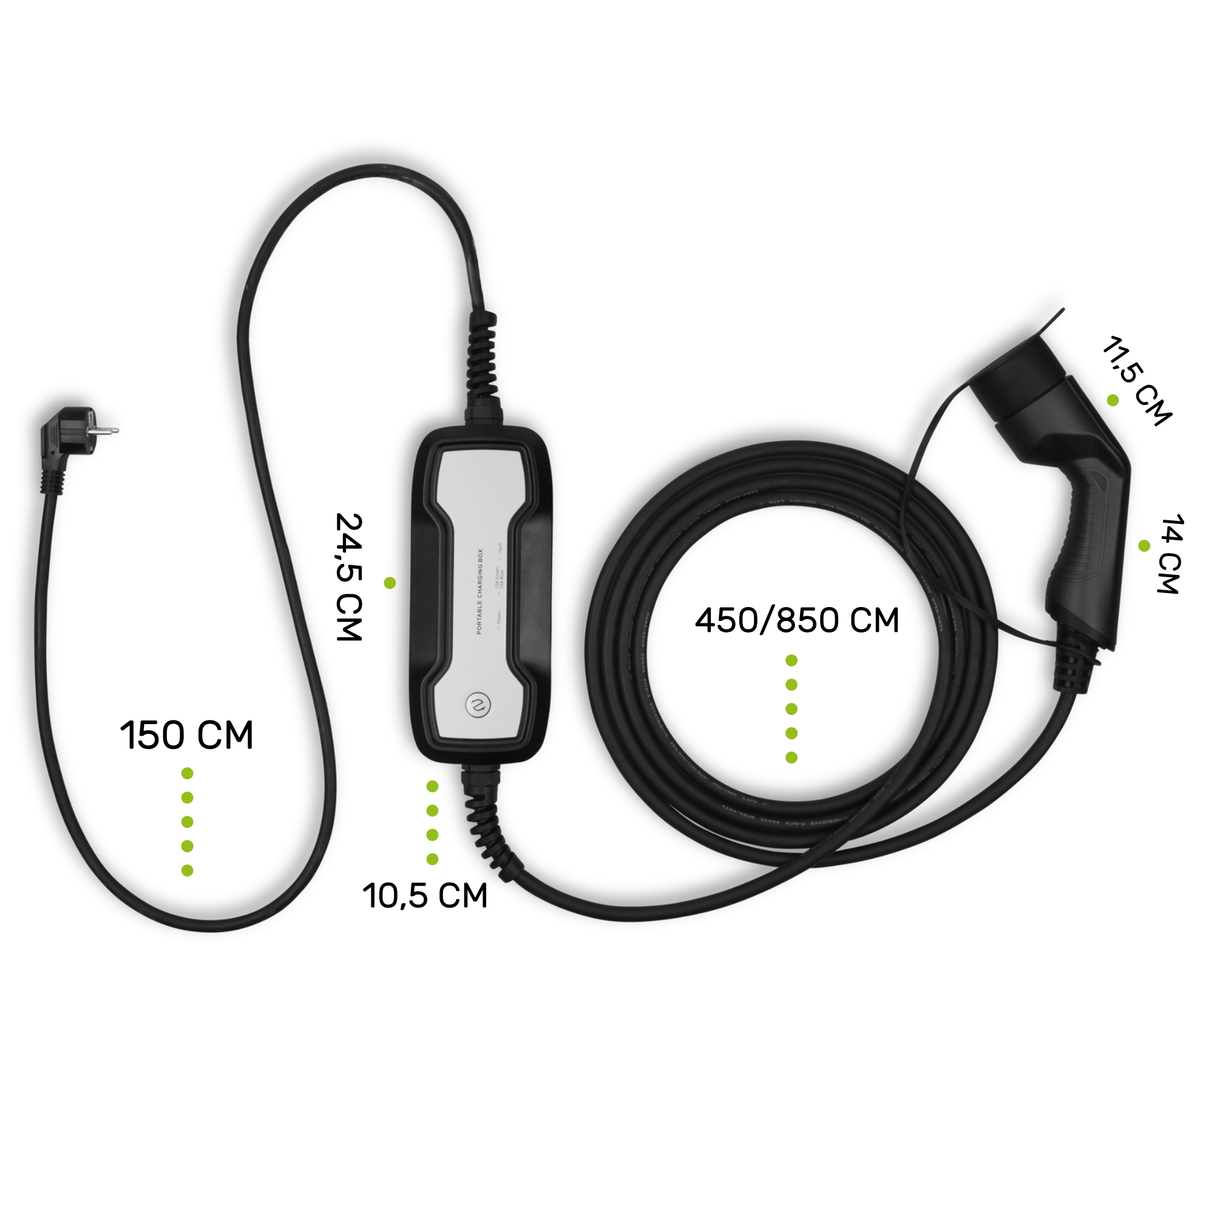 Mobile charger Volvo XC40 - Besen - Type 2 to Schuko